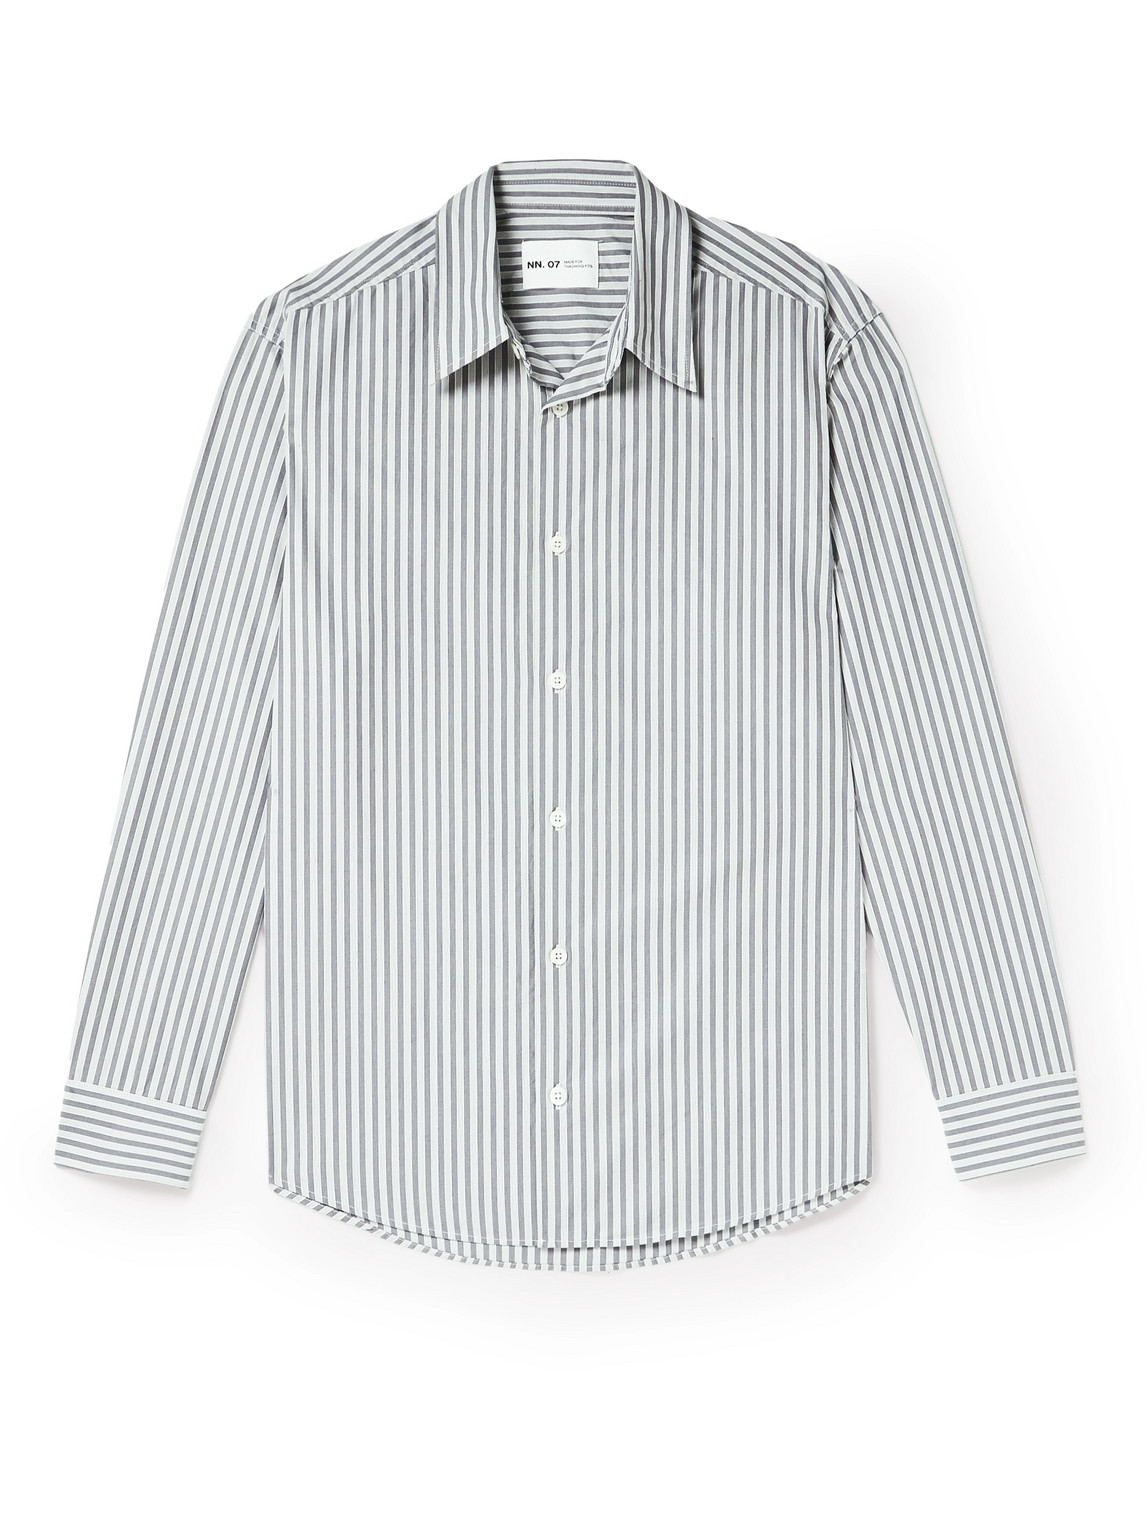 Nn07 Throwing Fits Quinsy 5973 Striped Cotton-poplin Shirt In Grey